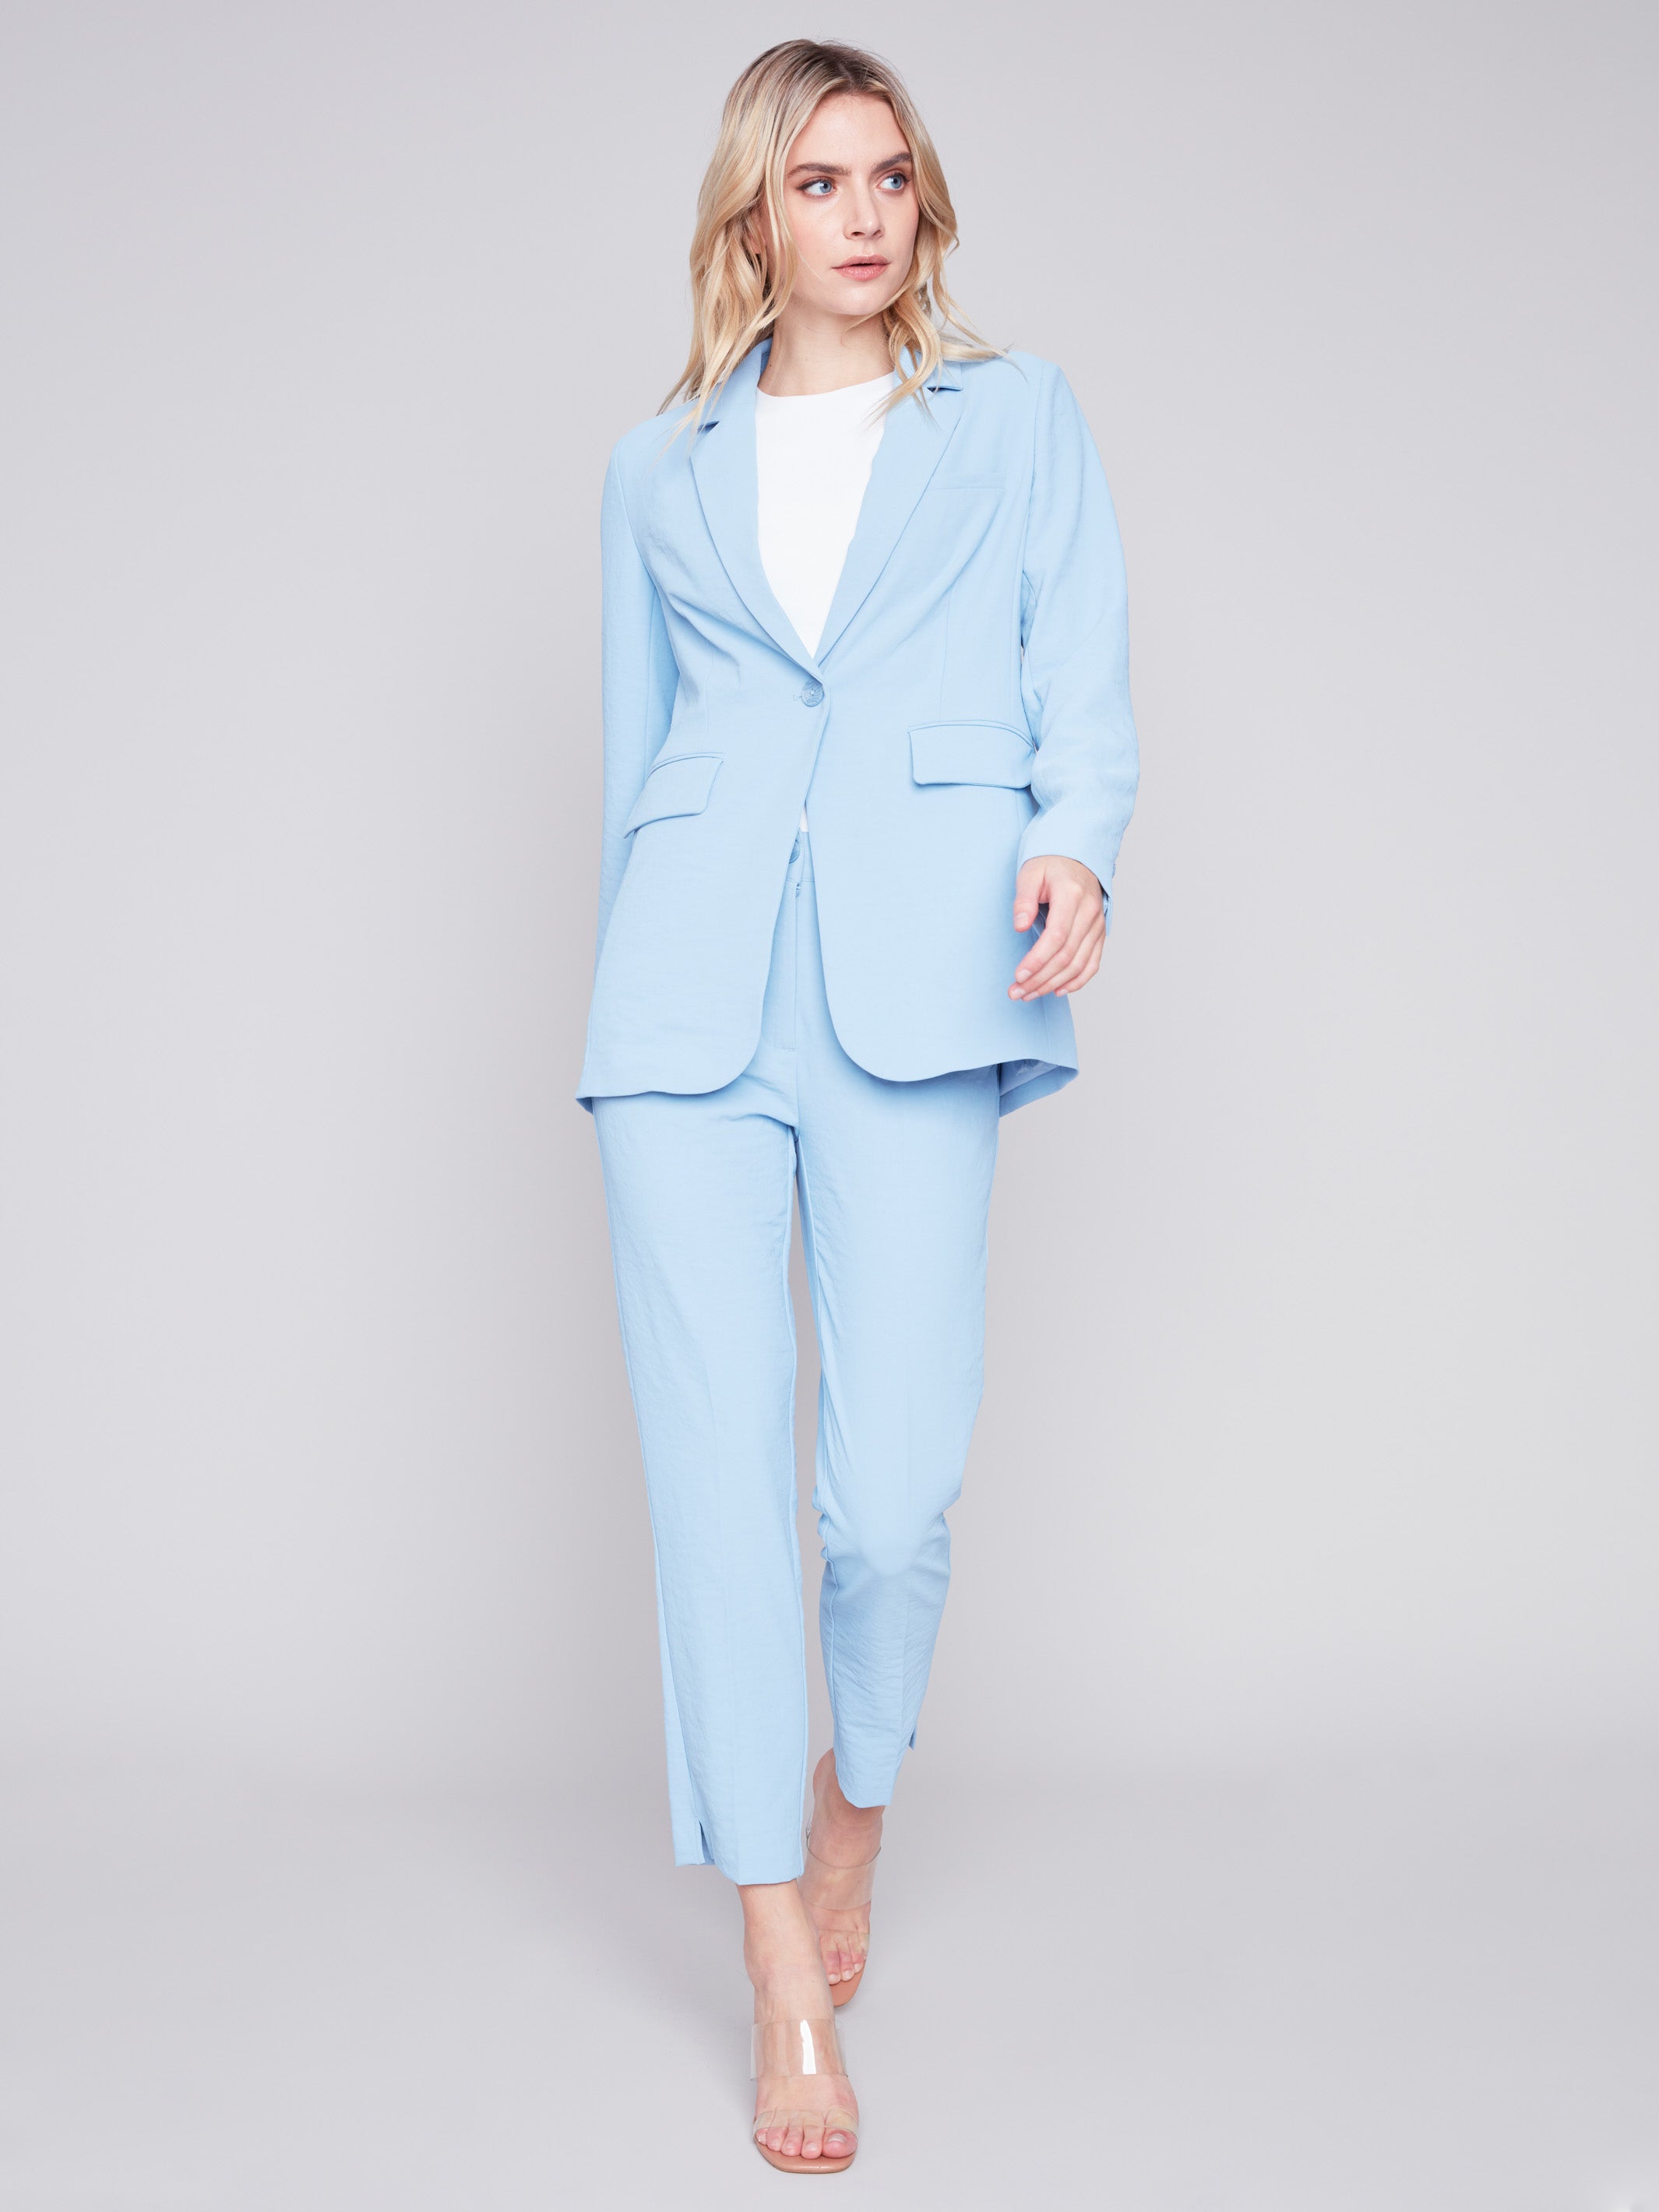 Blazer with Ruched Back - Sky - Charlie B Collection Canada - Image 2